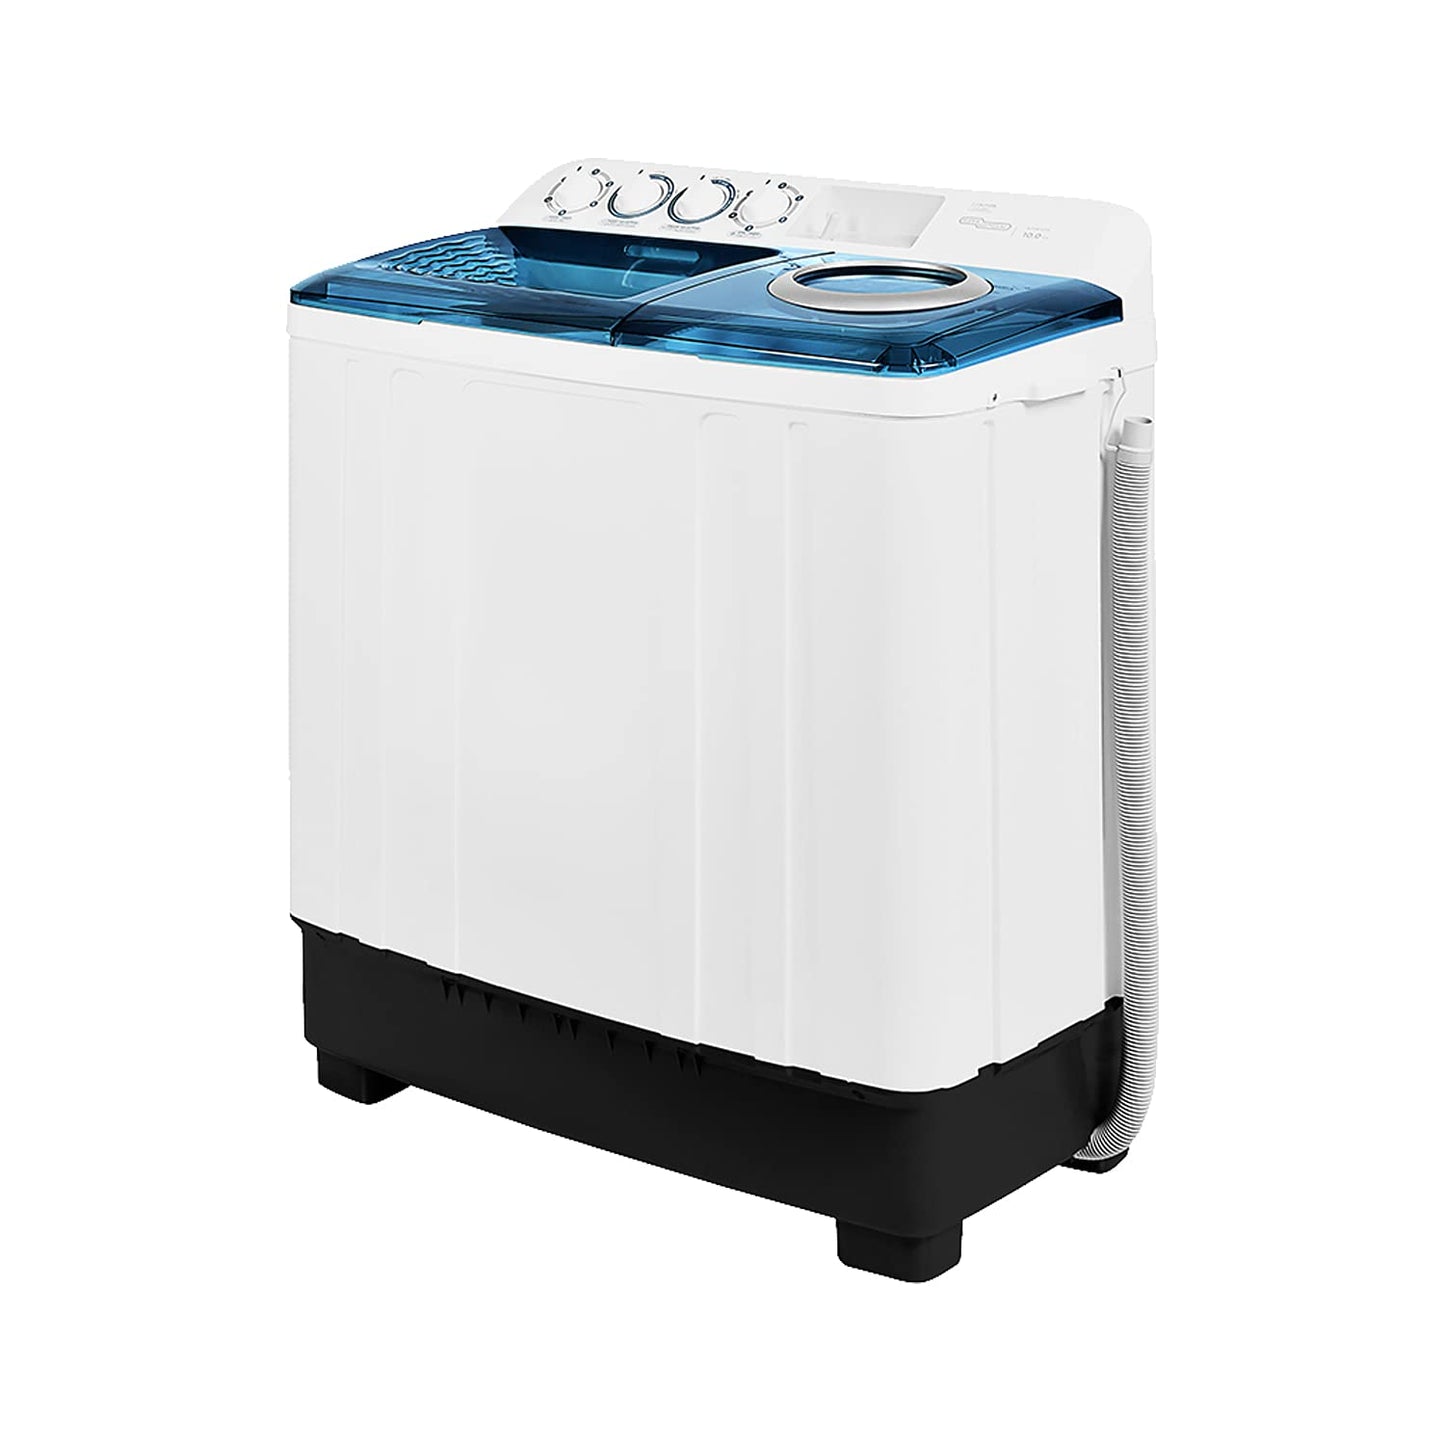 Super General 10 kg Twin-tub Semi-Automatic Washing Machine, White/Blue, efficient Top-Load Washer with Lint Filter, Spin-Dry, SGW-105, 87 x 51.2 x 100.5 cm, 1 Year Warranty